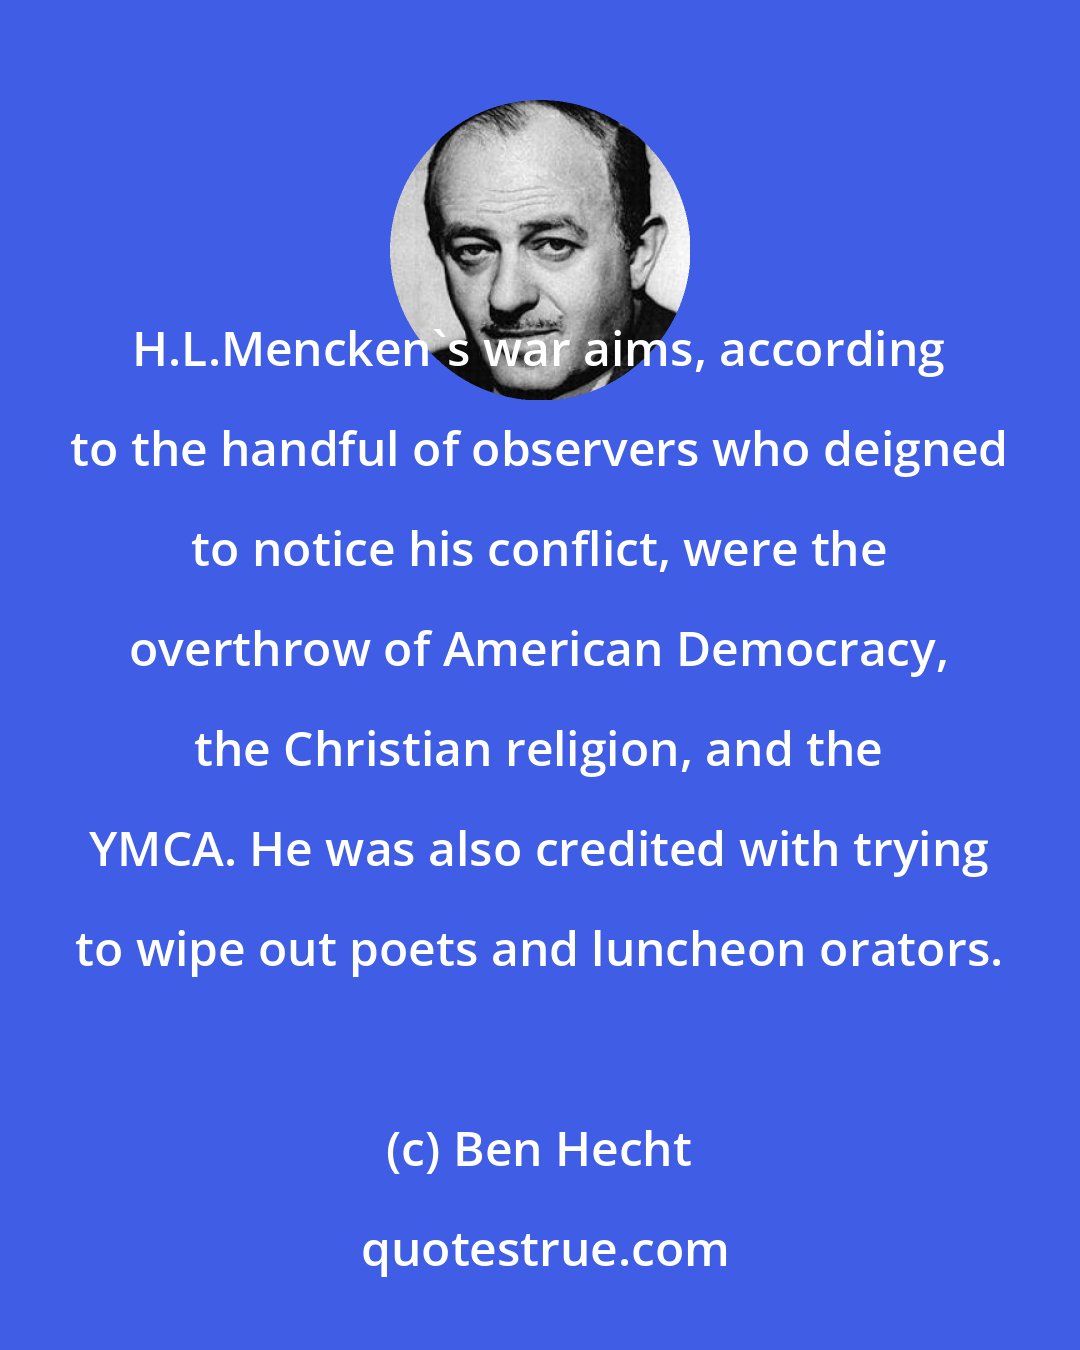 Ben Hecht: H.L.Mencken's war aims, according to the handful of observers who deigned to notice his conflict, were the overthrow of American Democracy, the Christian religion, and the YMCA. He was also credited with trying to wipe out poets and luncheon orators.